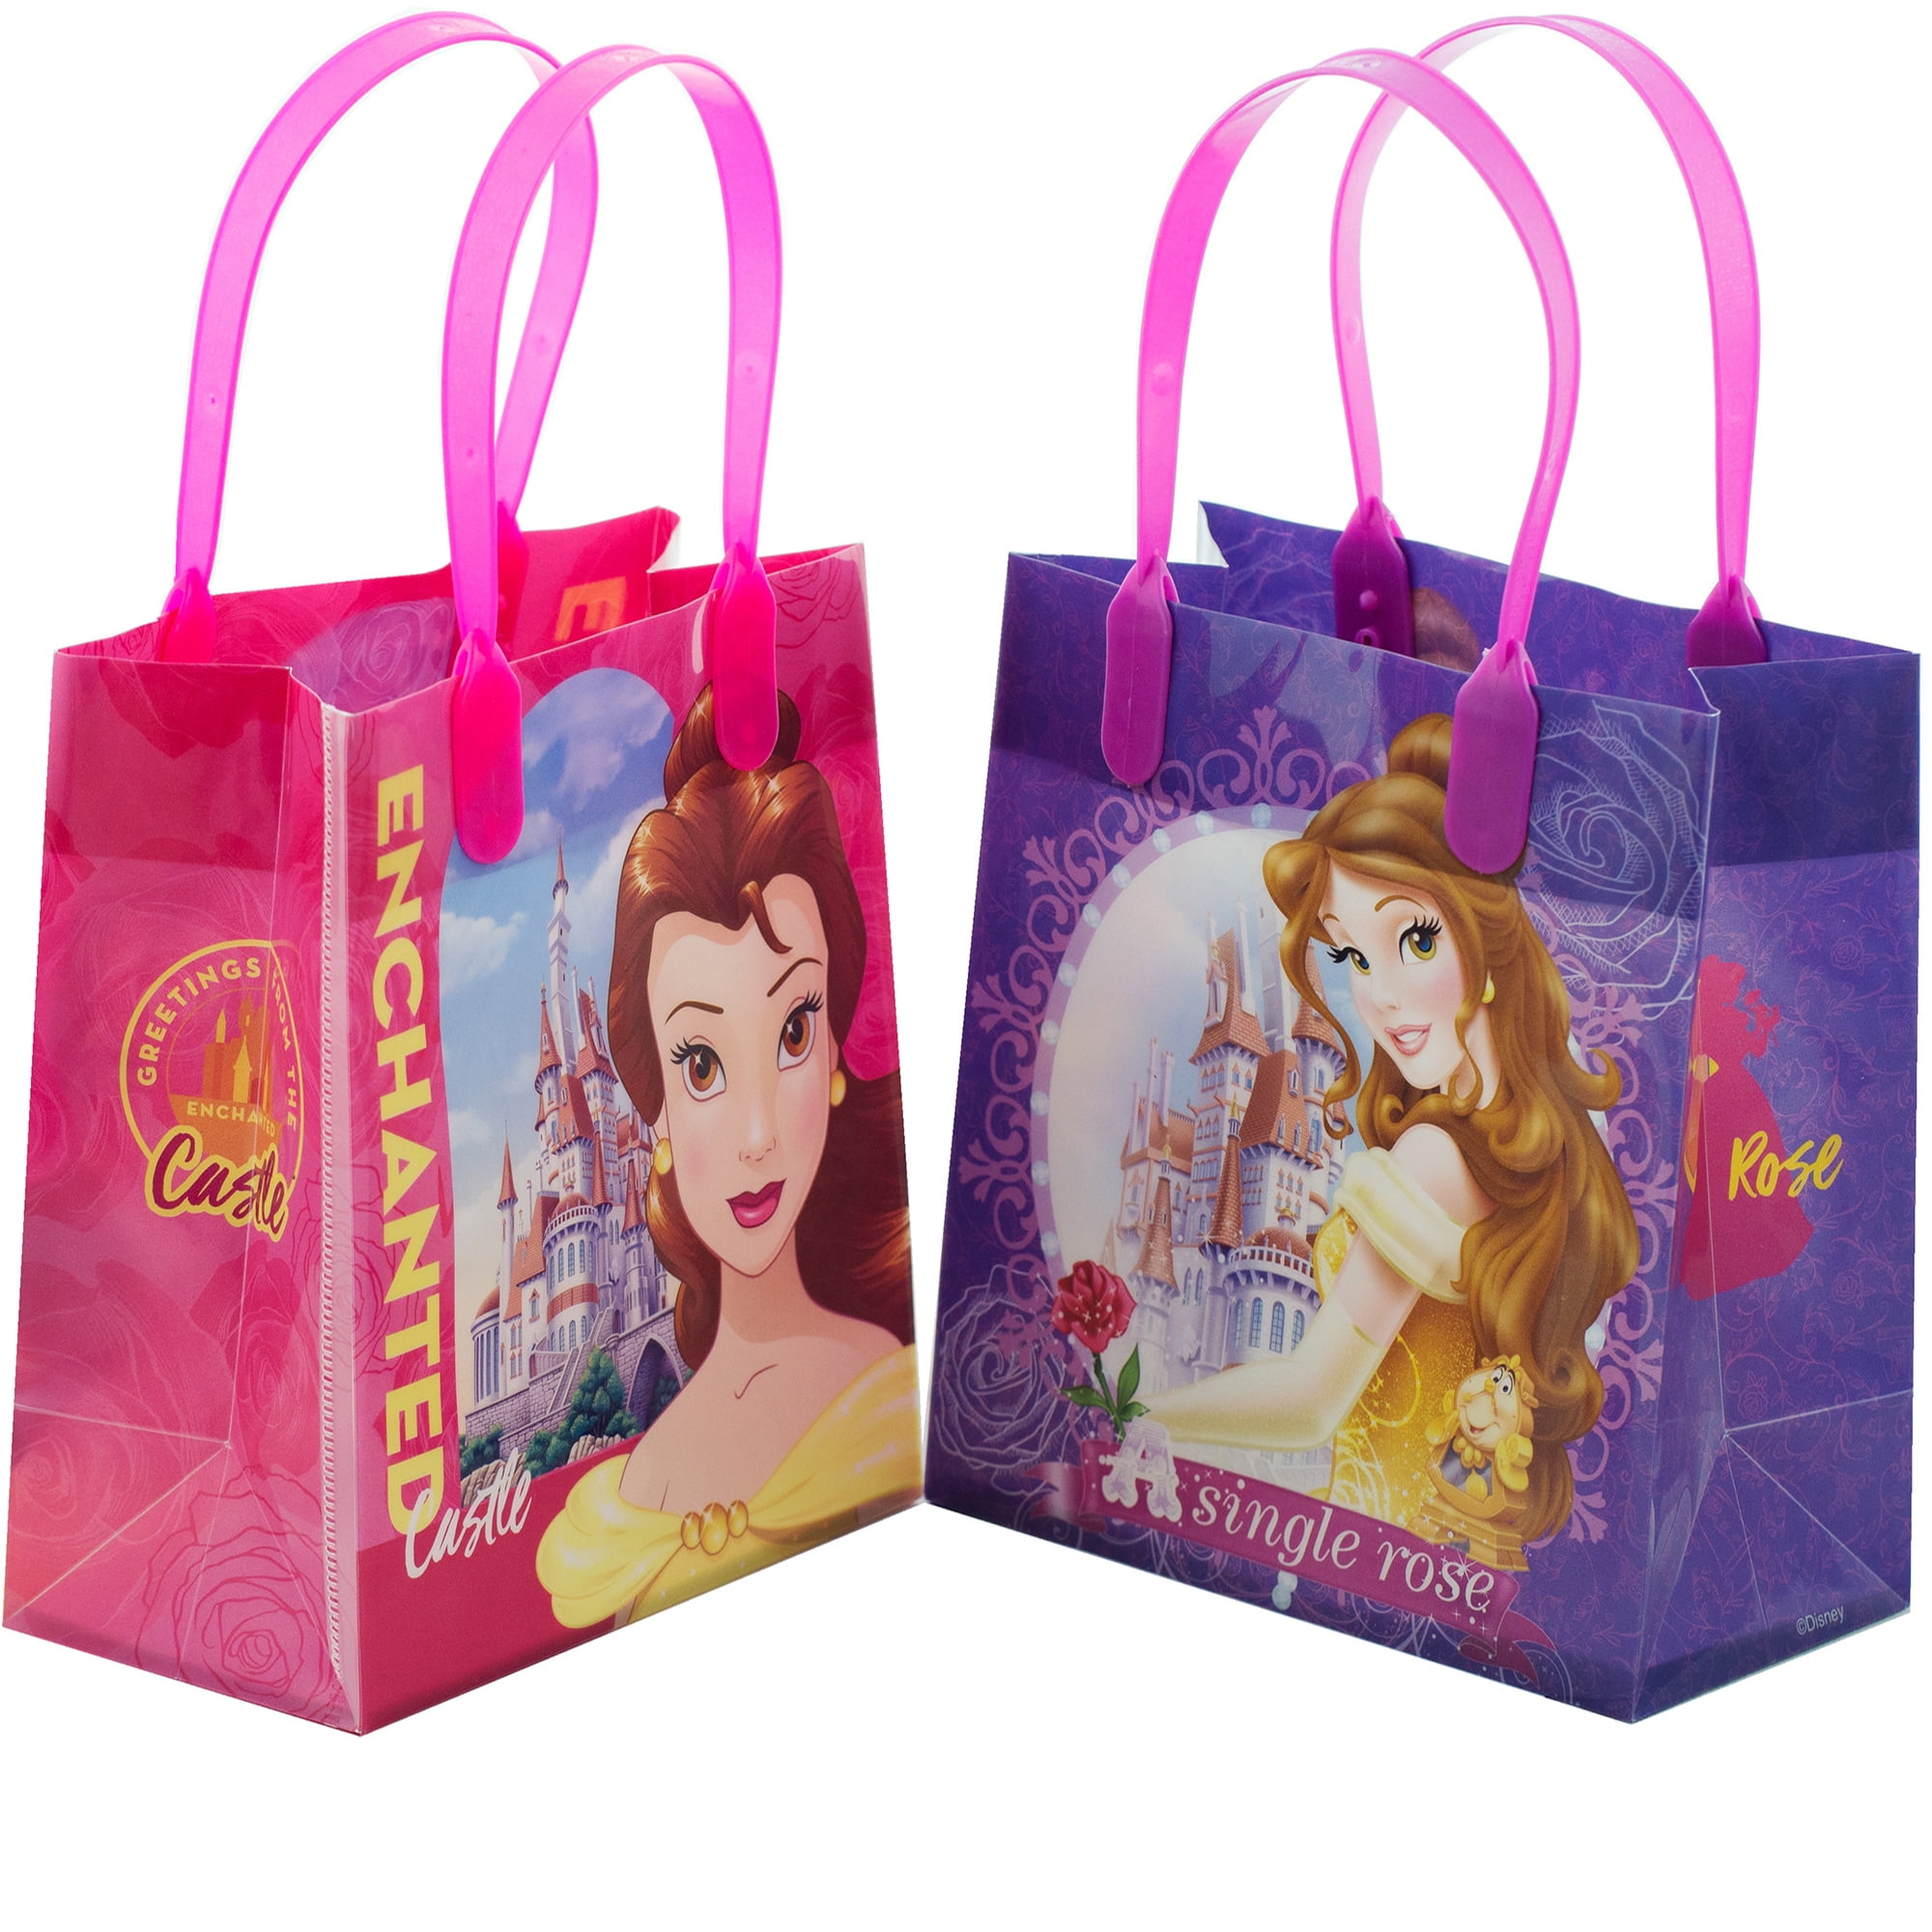 25pc Disney Princess Treat Favor Birthday Party Loot Candy Gift Bags 